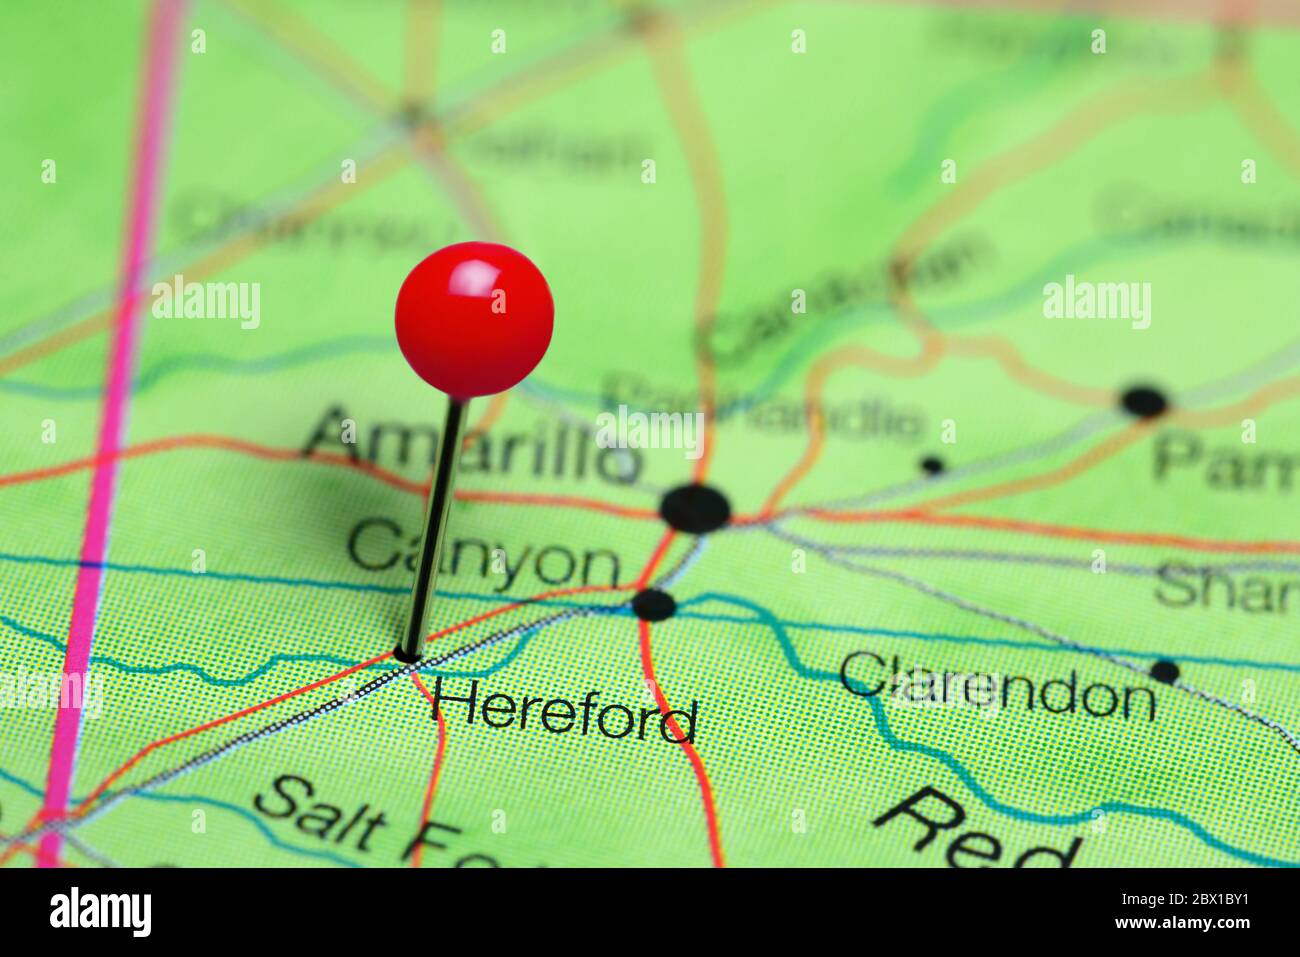 Hereford pinned on a map of Texas, USA Stock Photo